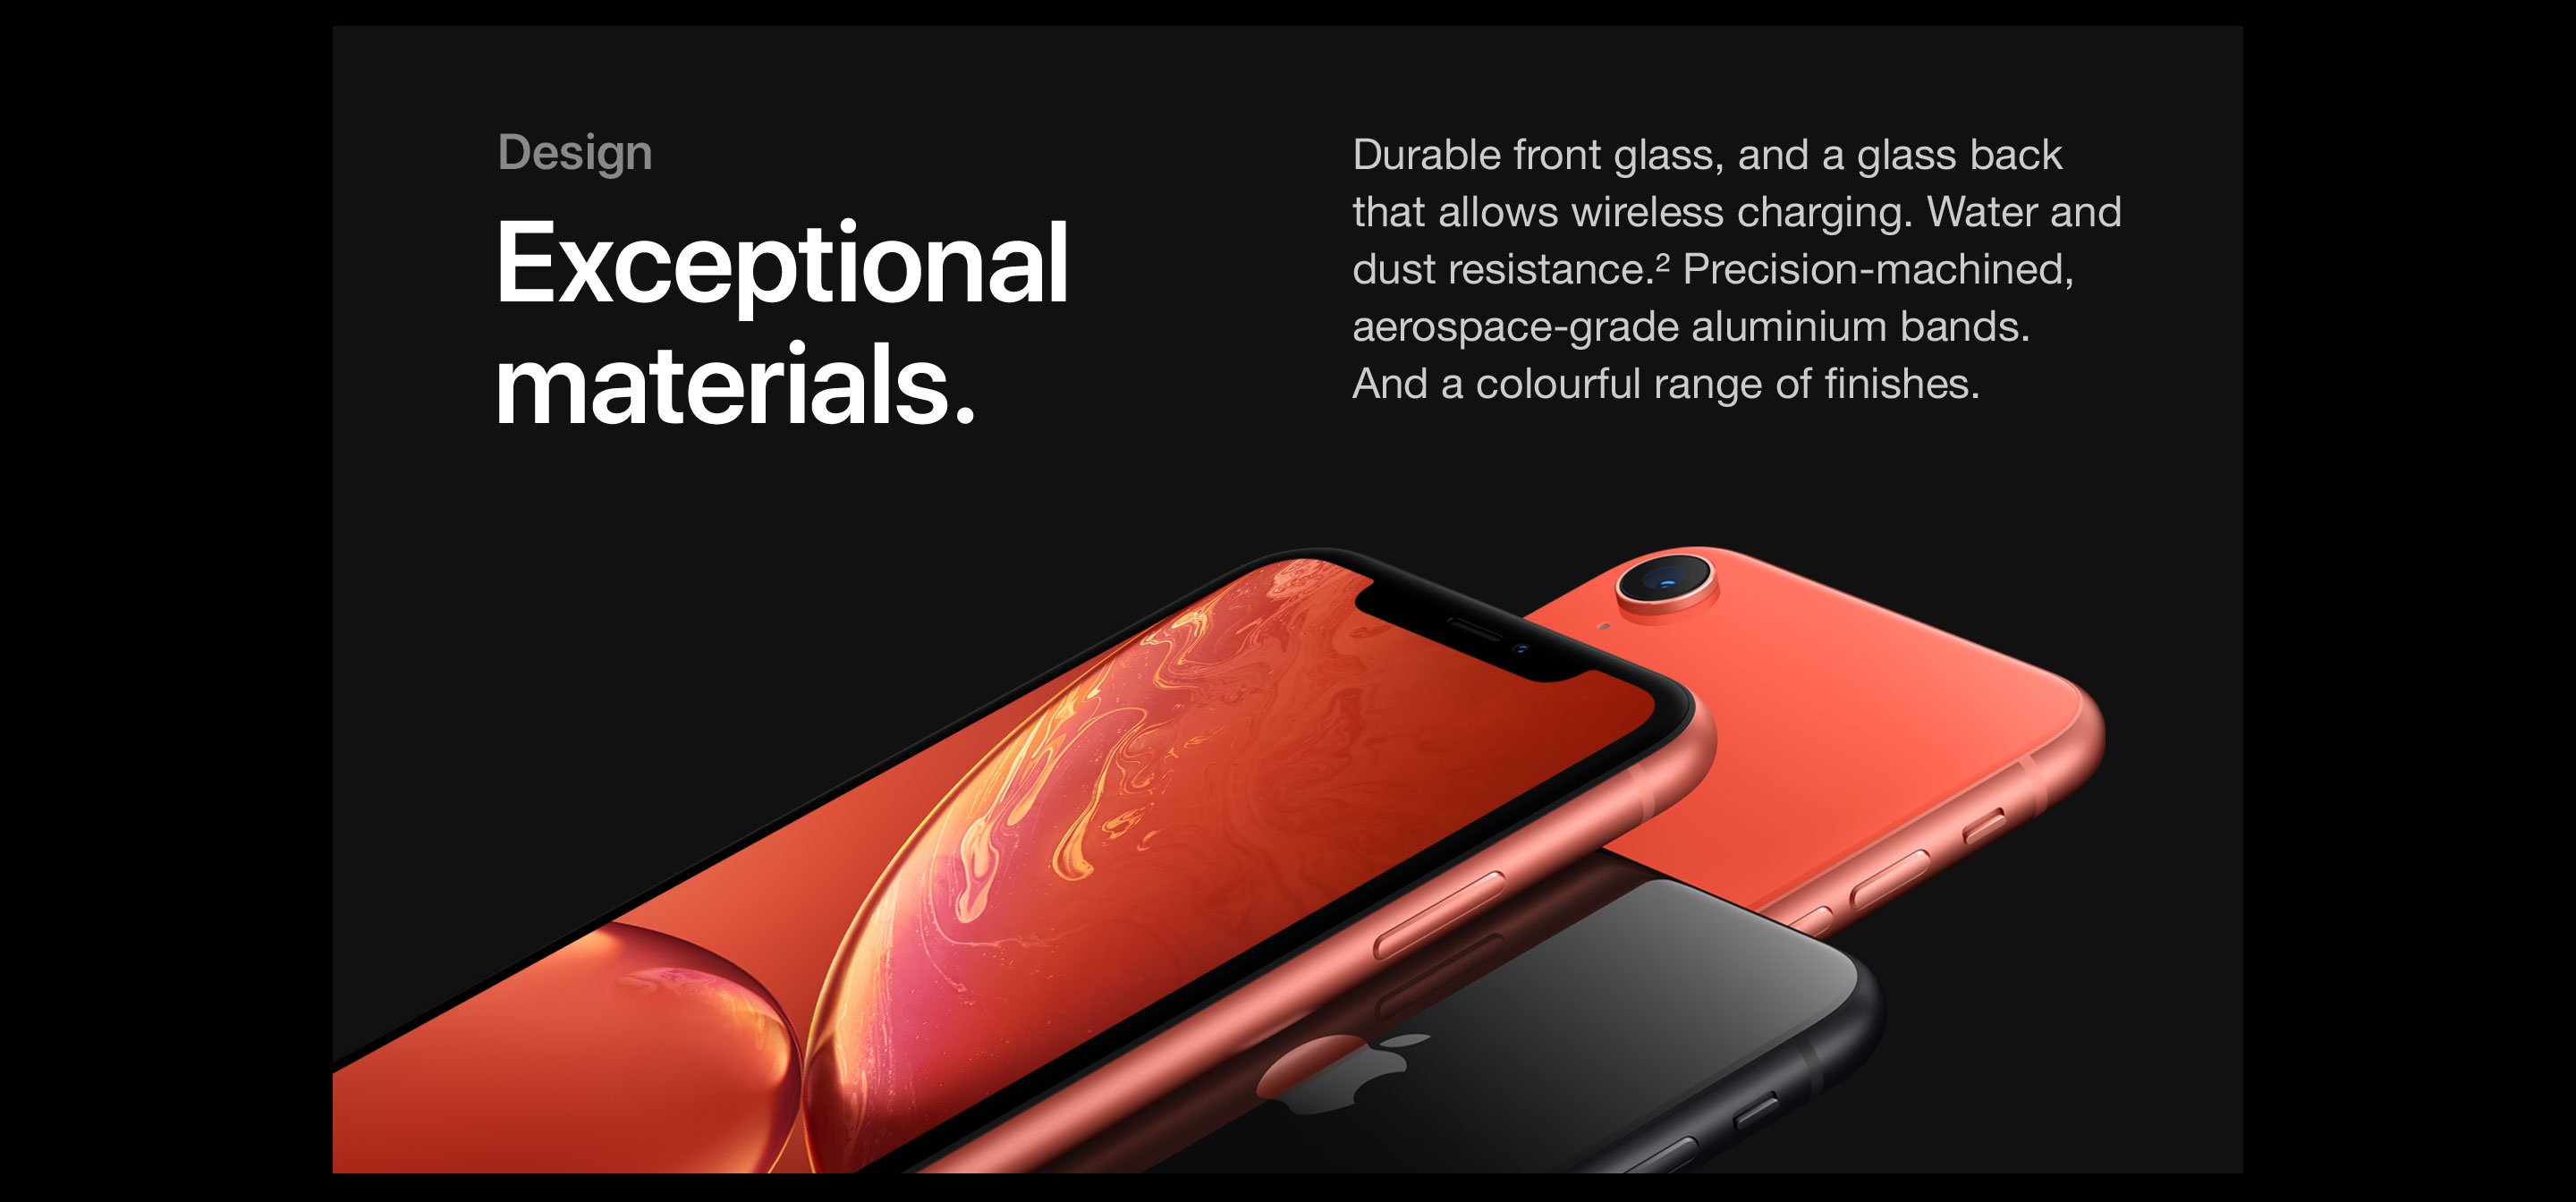 u-mobile-iphone-xr-features